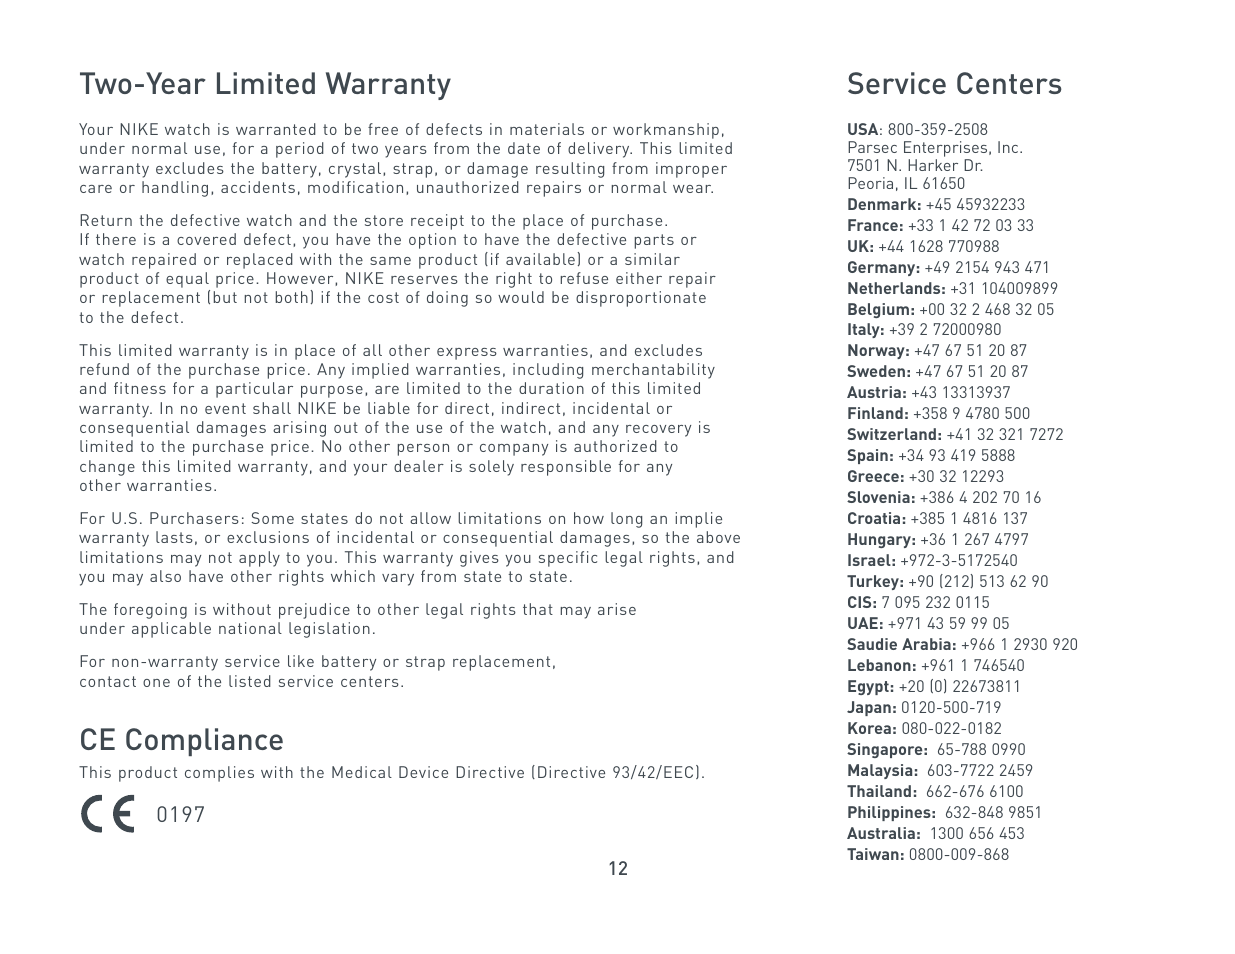 Two-year limited warranty, Ce compliance, Service centers | Nike Triax C5  User Manual | Page 12 / 12